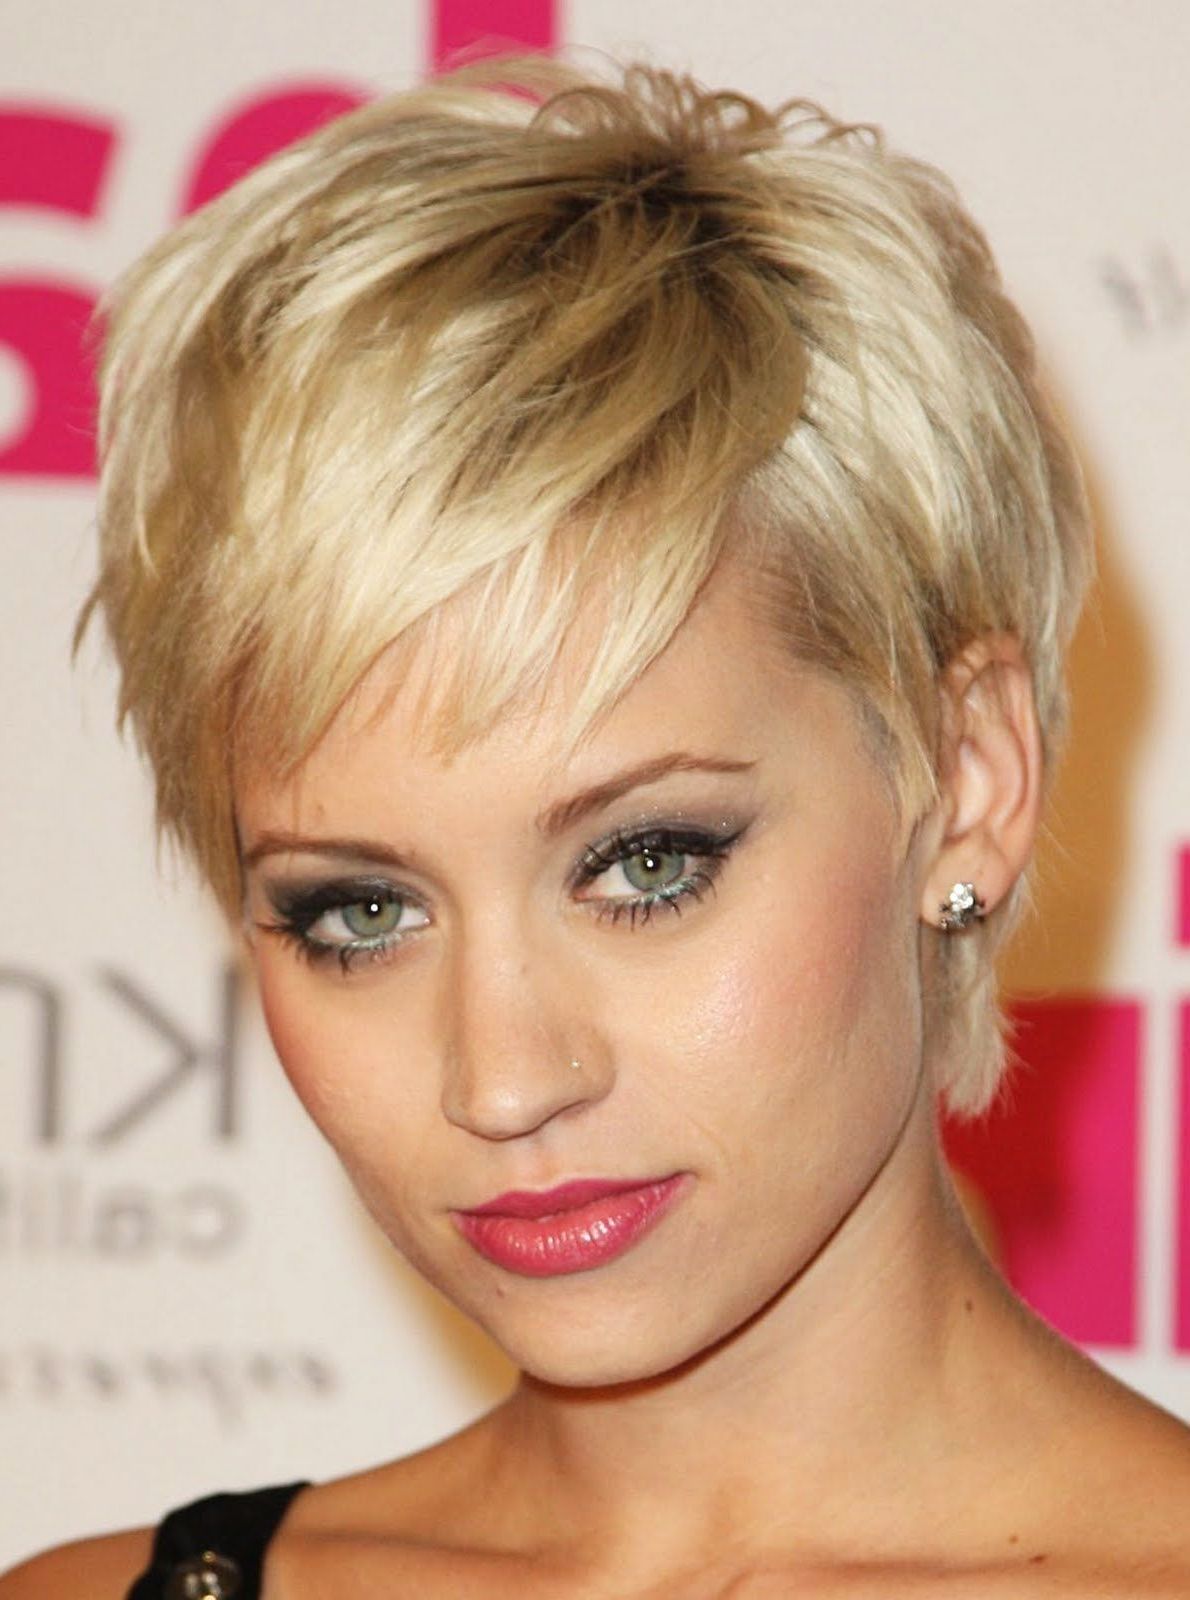 Short Hairstyles For Oval Faces | Hair Cut | Pinterest | Short Hair With Regard To Short Hairstyles For An Oval Face (Photo 2 of 25)